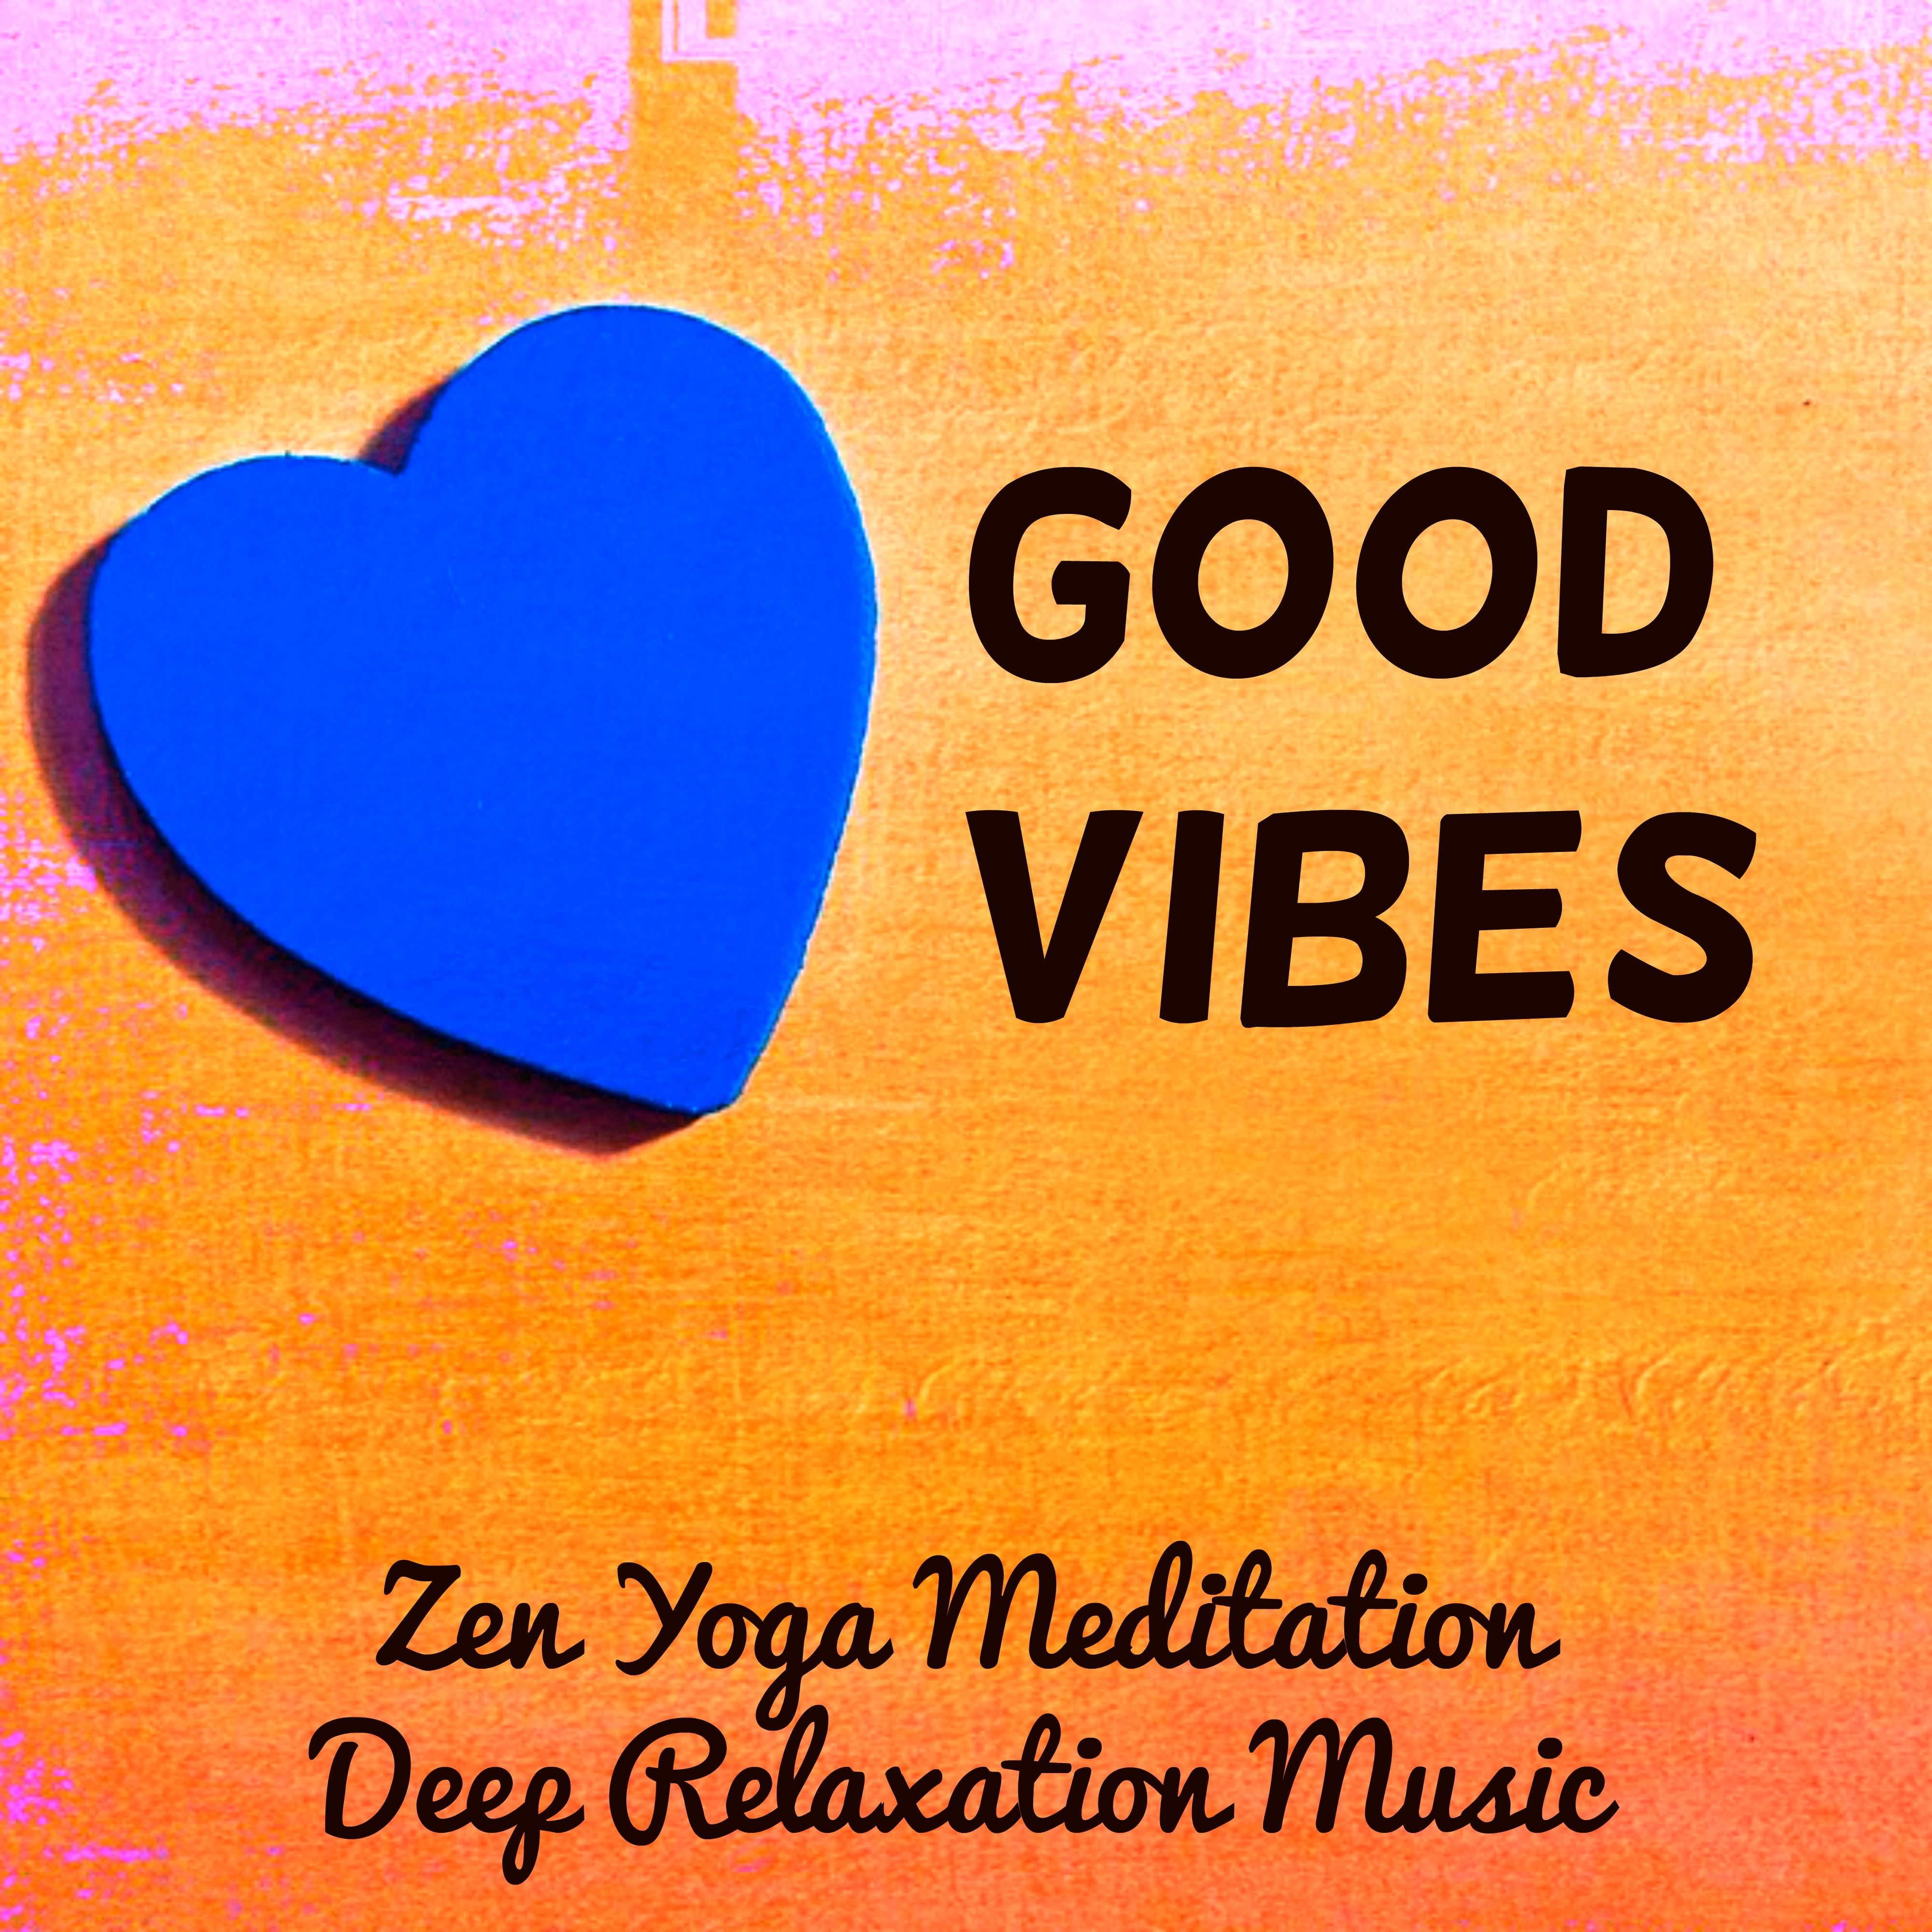 Good Vibes - Zen Yoga Meditation Deep Relaxation Music for Free Thoughts Good Feelings with Instrumental Healing Soothing Sounds